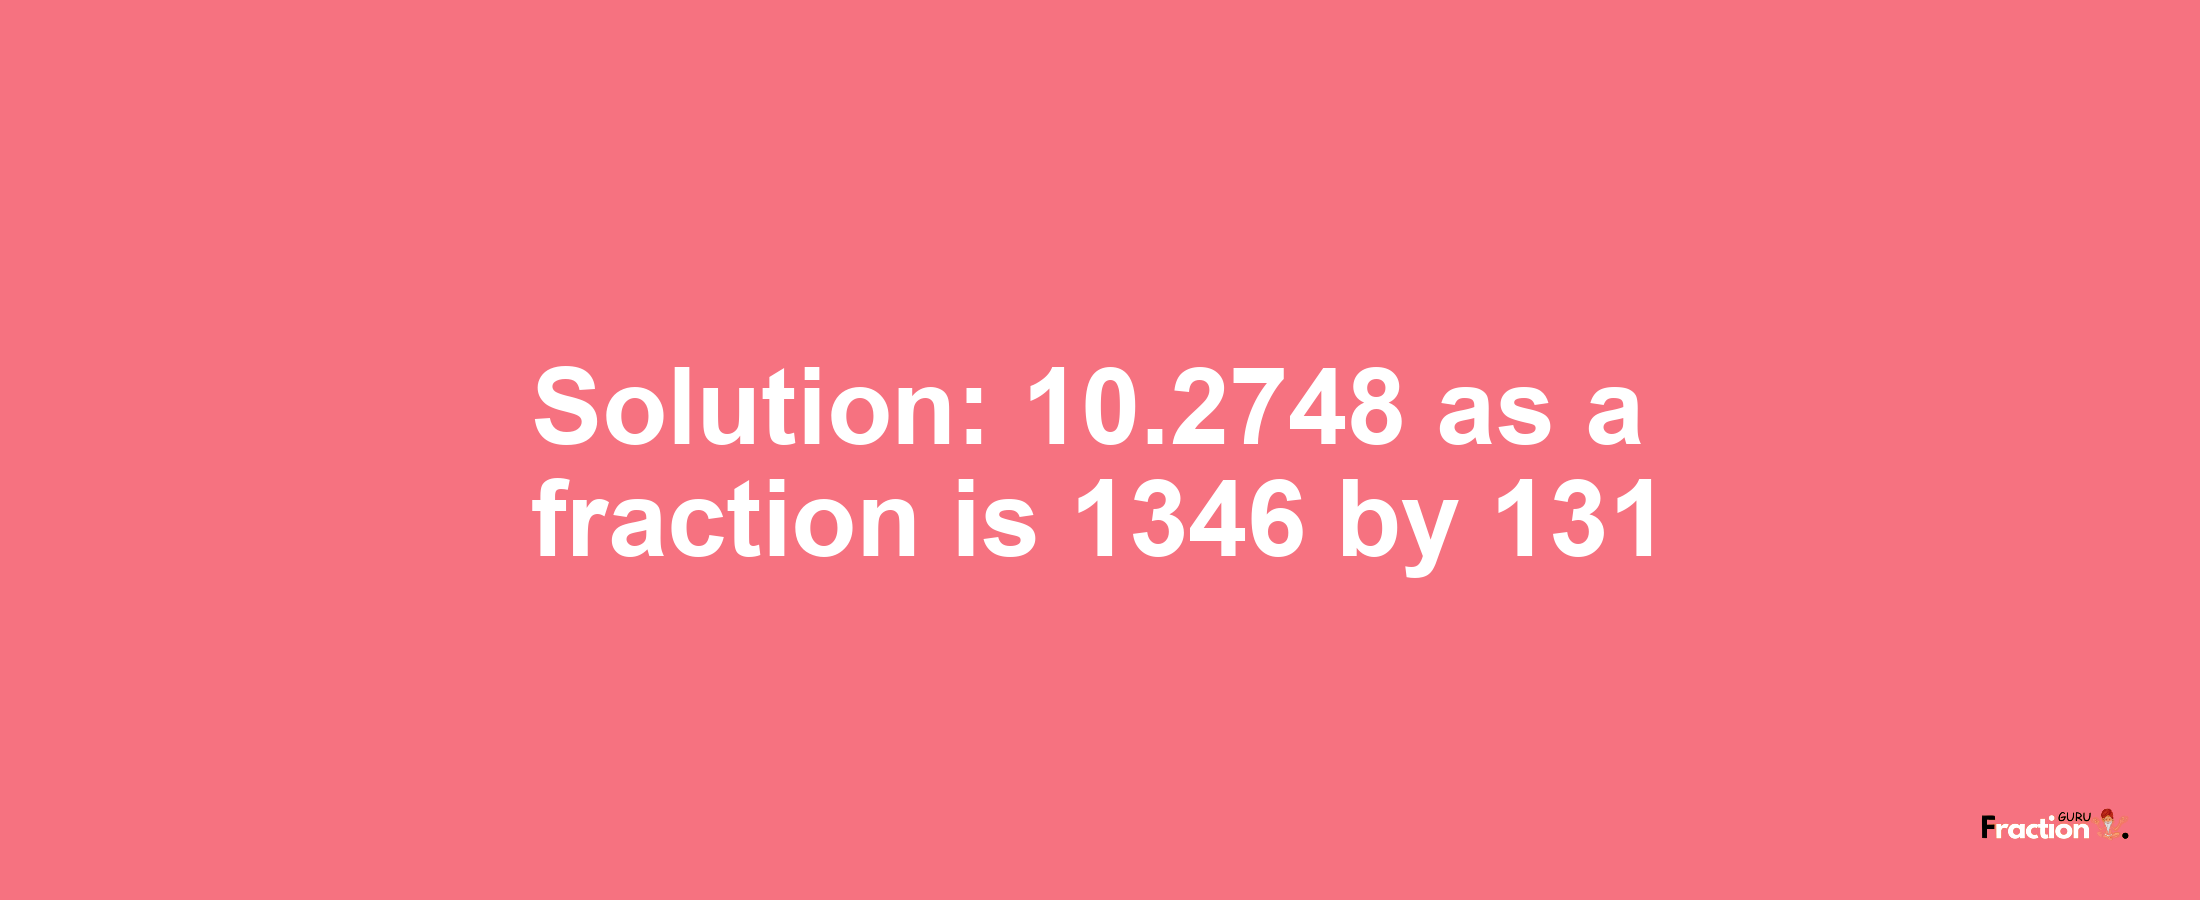 Solution:10.2748 as a fraction is 1346/131